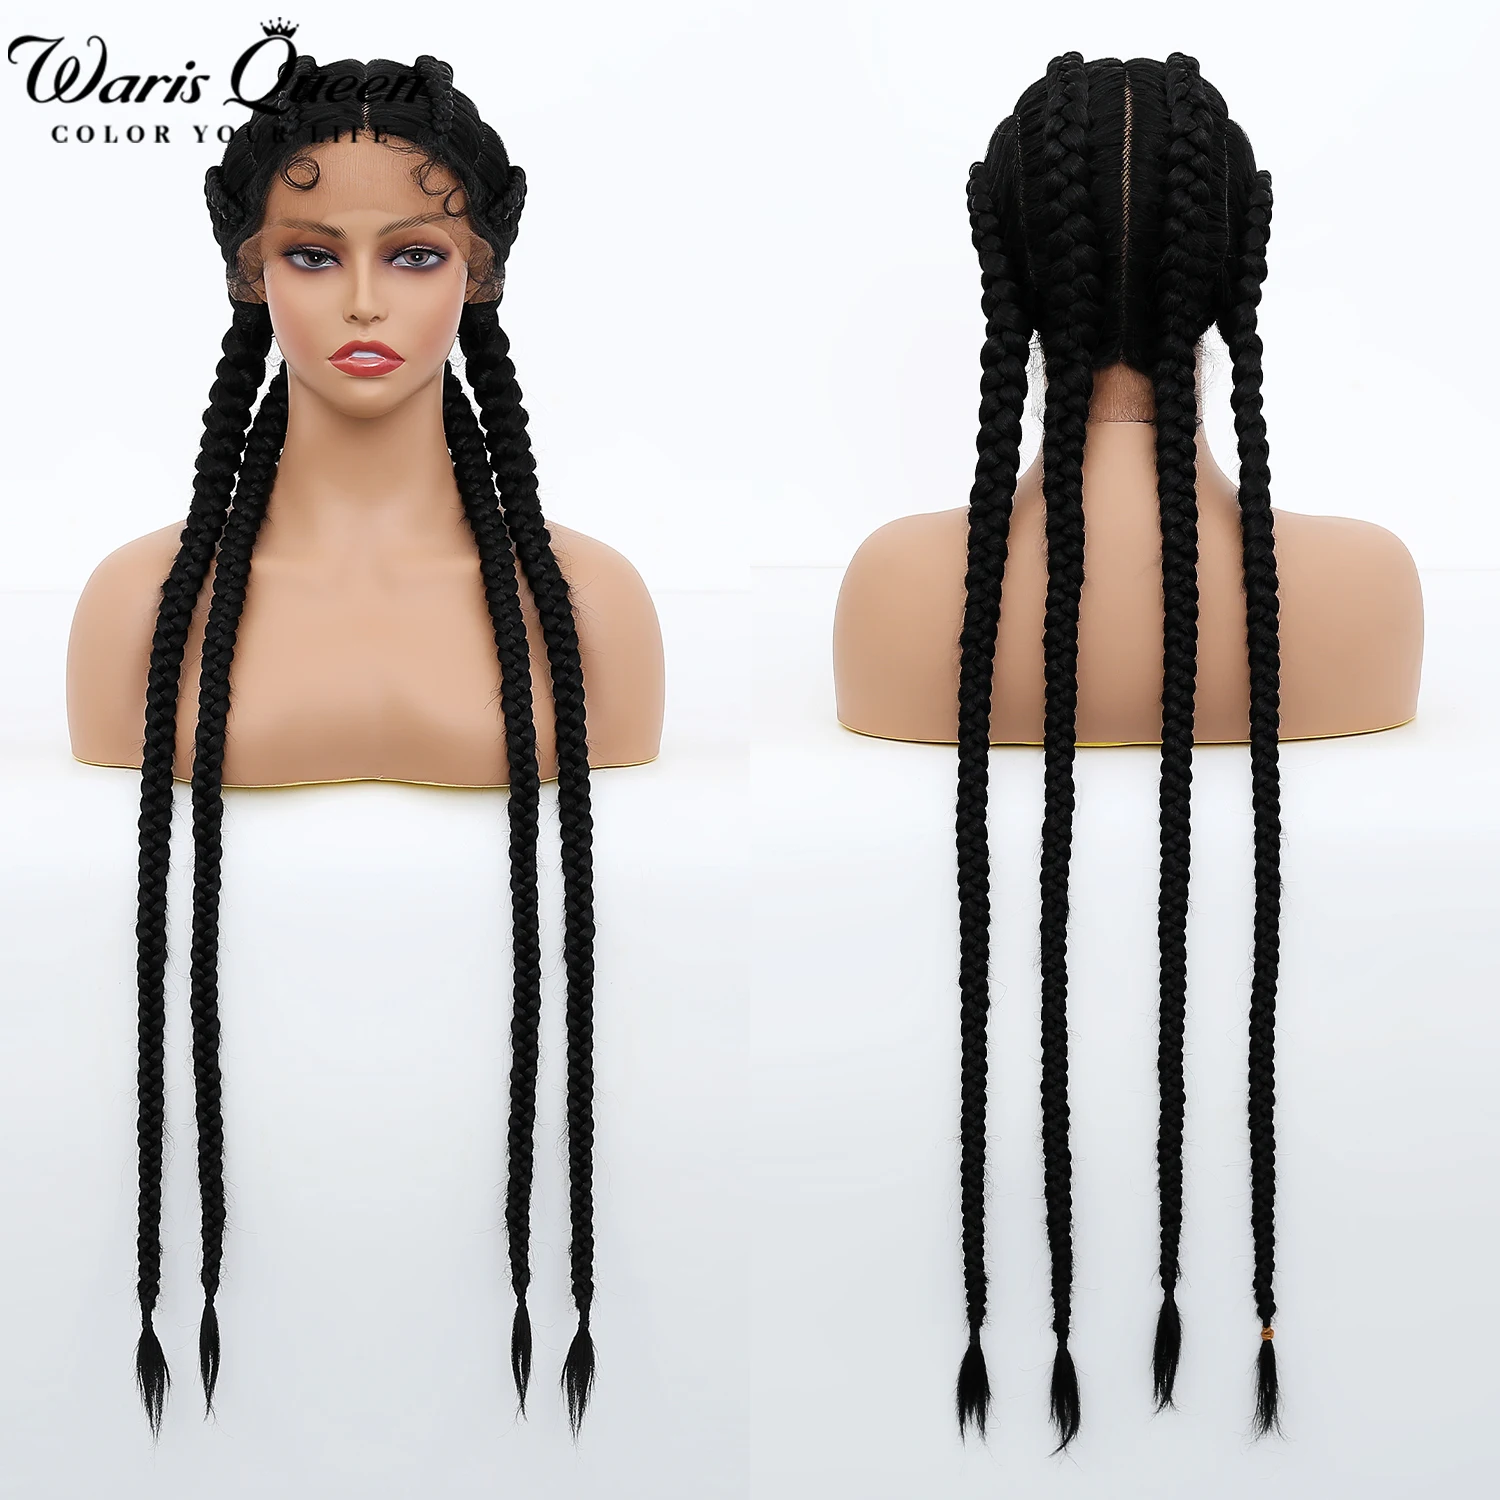 NEW Braided Lace Front Wig Synthetic Wigs For Black Women 36 Inch 4 Long Box Braid Wig With Baby Hair 360 Lace Frontal Perruque